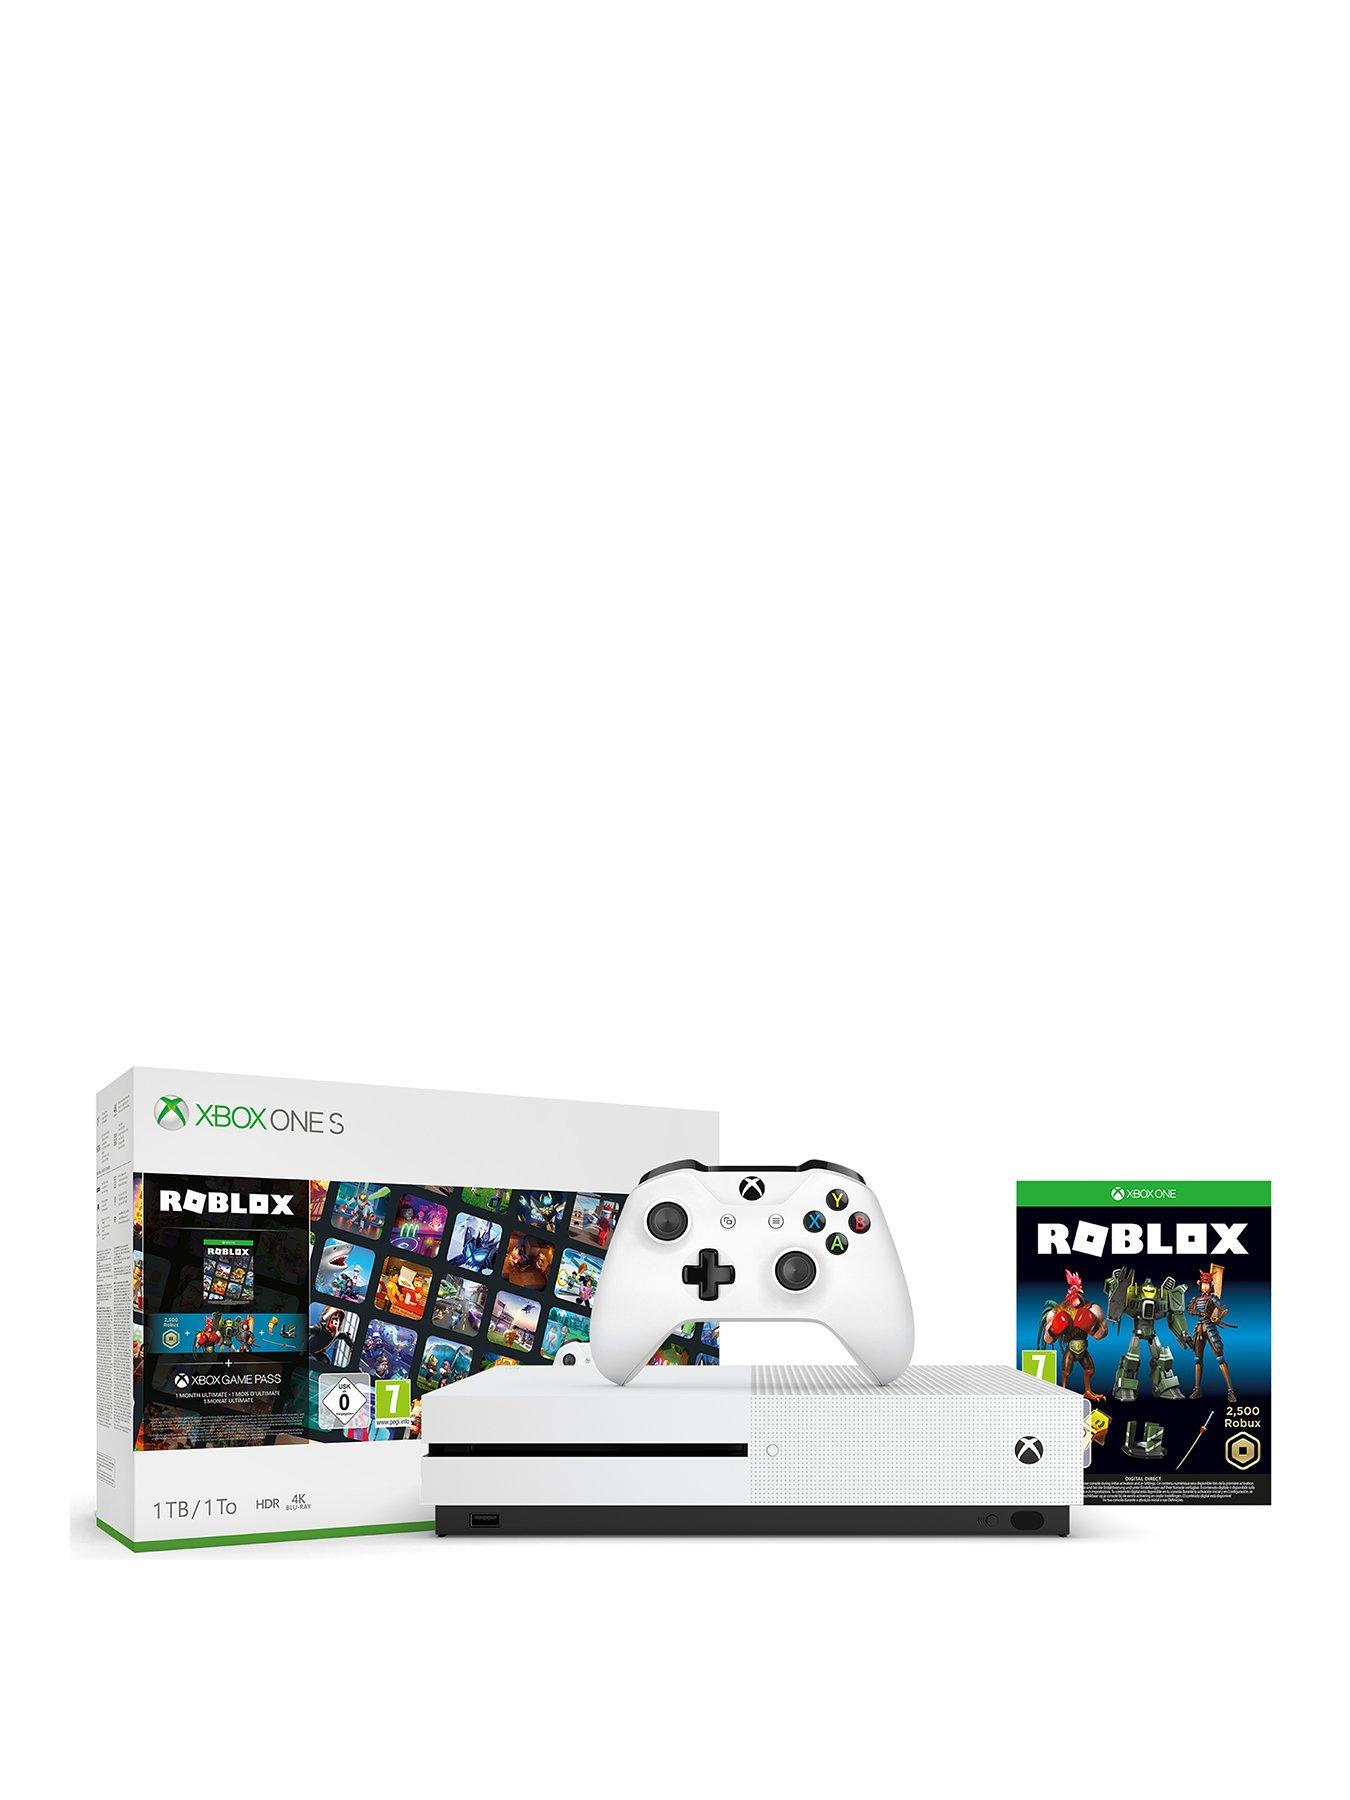 Xbox One S With Roblox Bundle And Optional Extras 1tb Console White Very Co Uk - roblox xbox code 106 roblox free to play